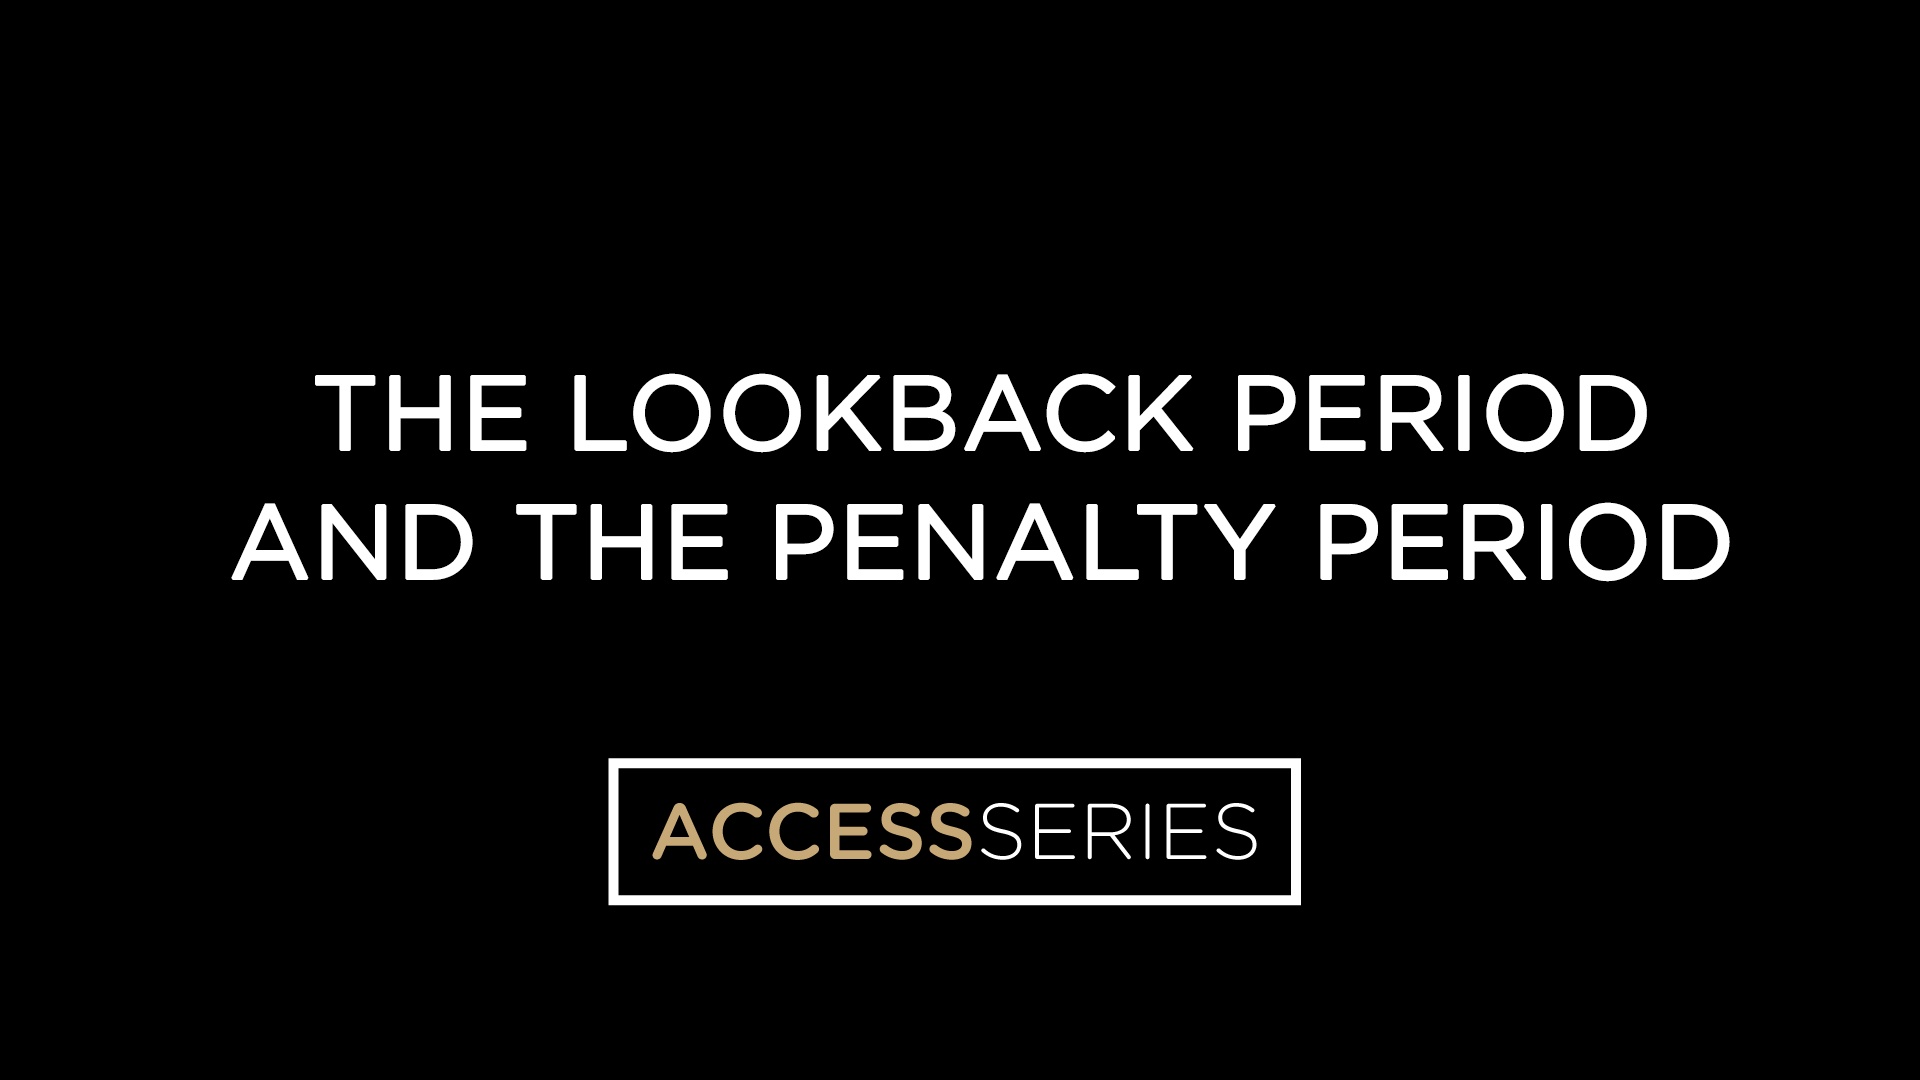 The Lookback Period and the Penalty Period